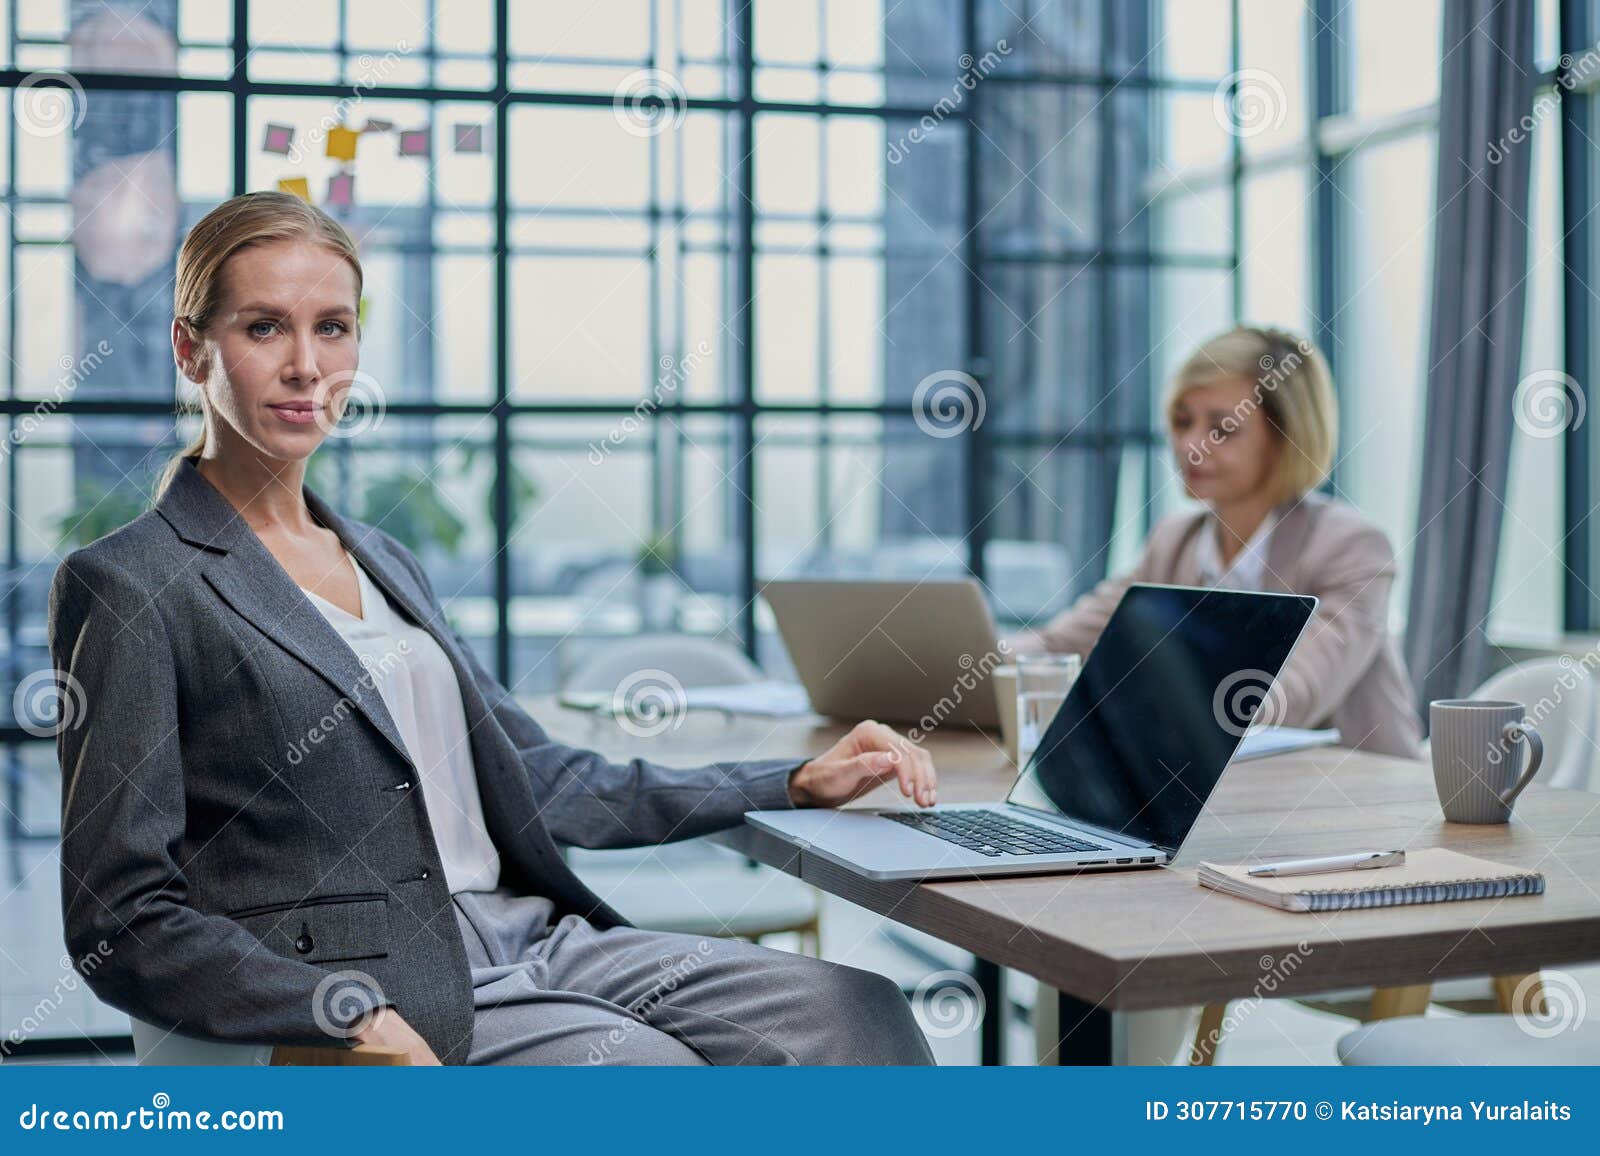 young woman with computers at desk in office